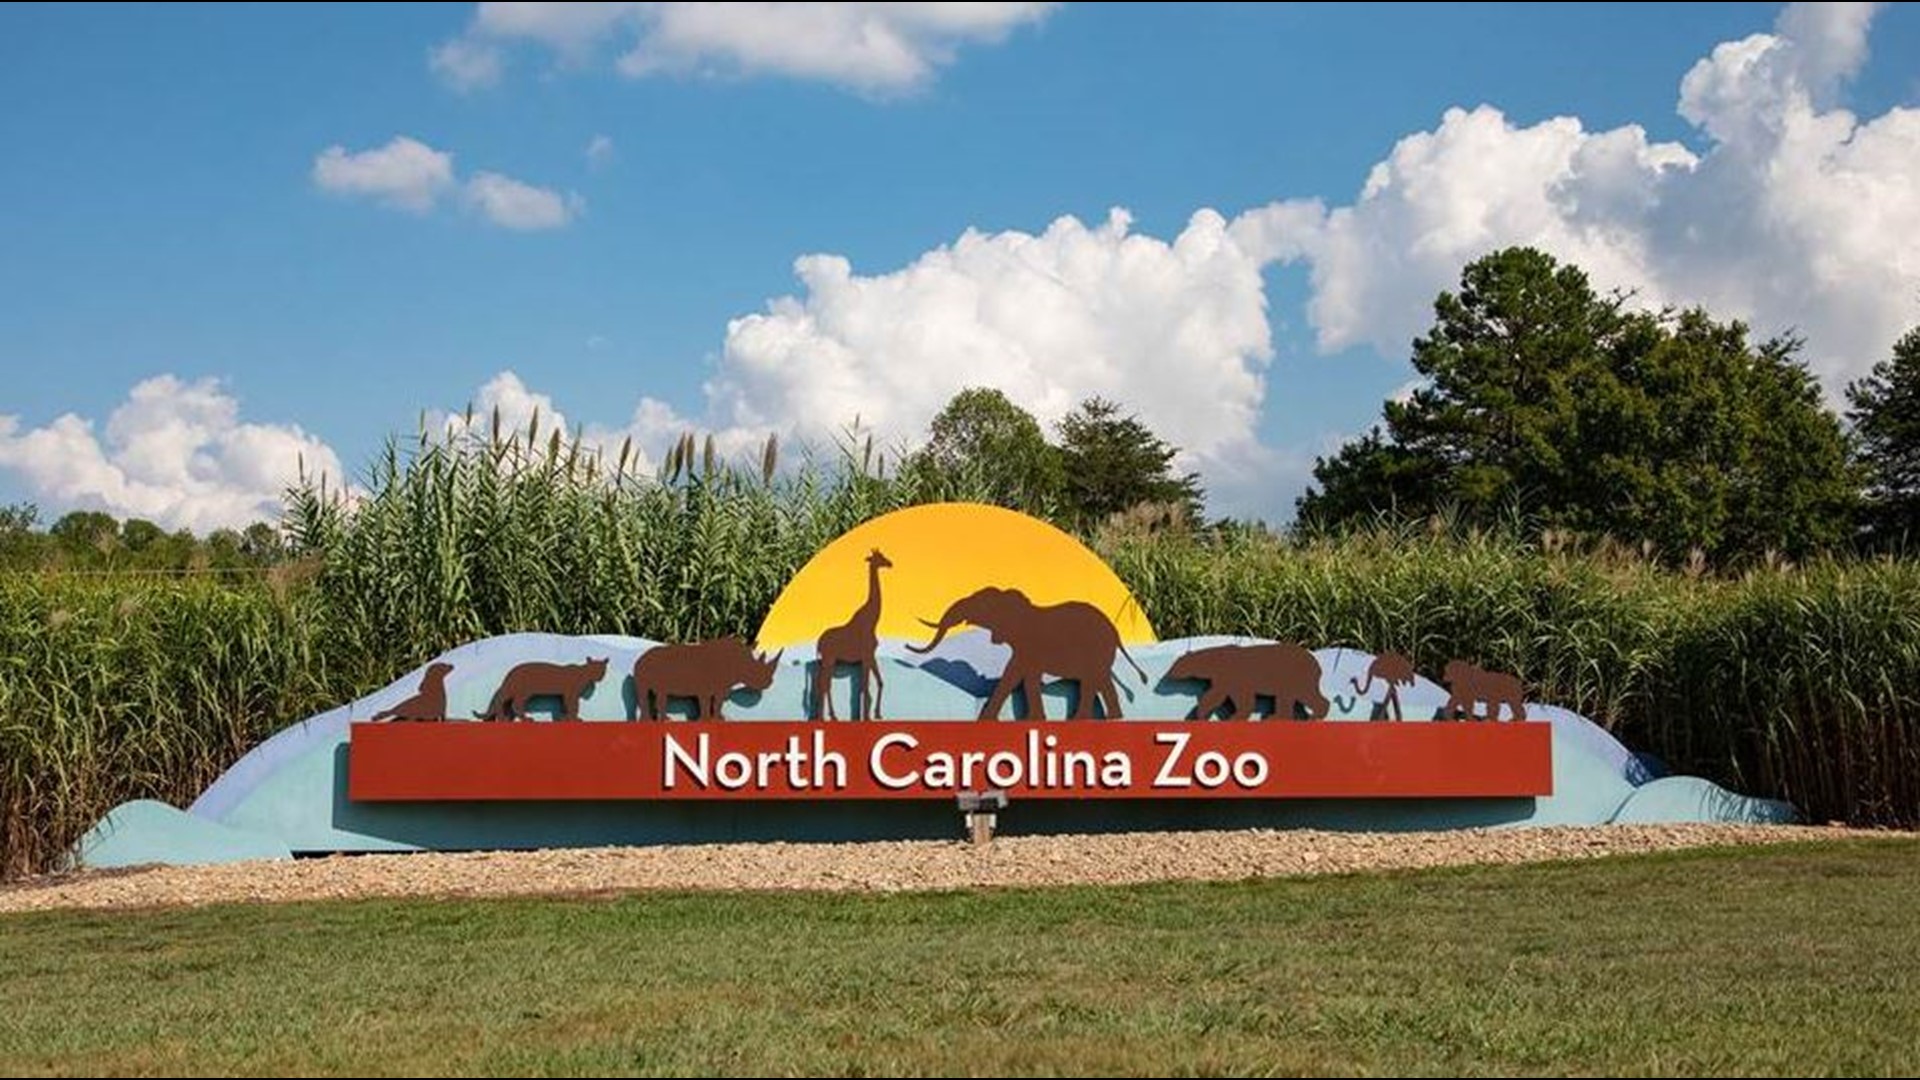 NC Zoo expansion will include adding two new continents including Asia and Australia.